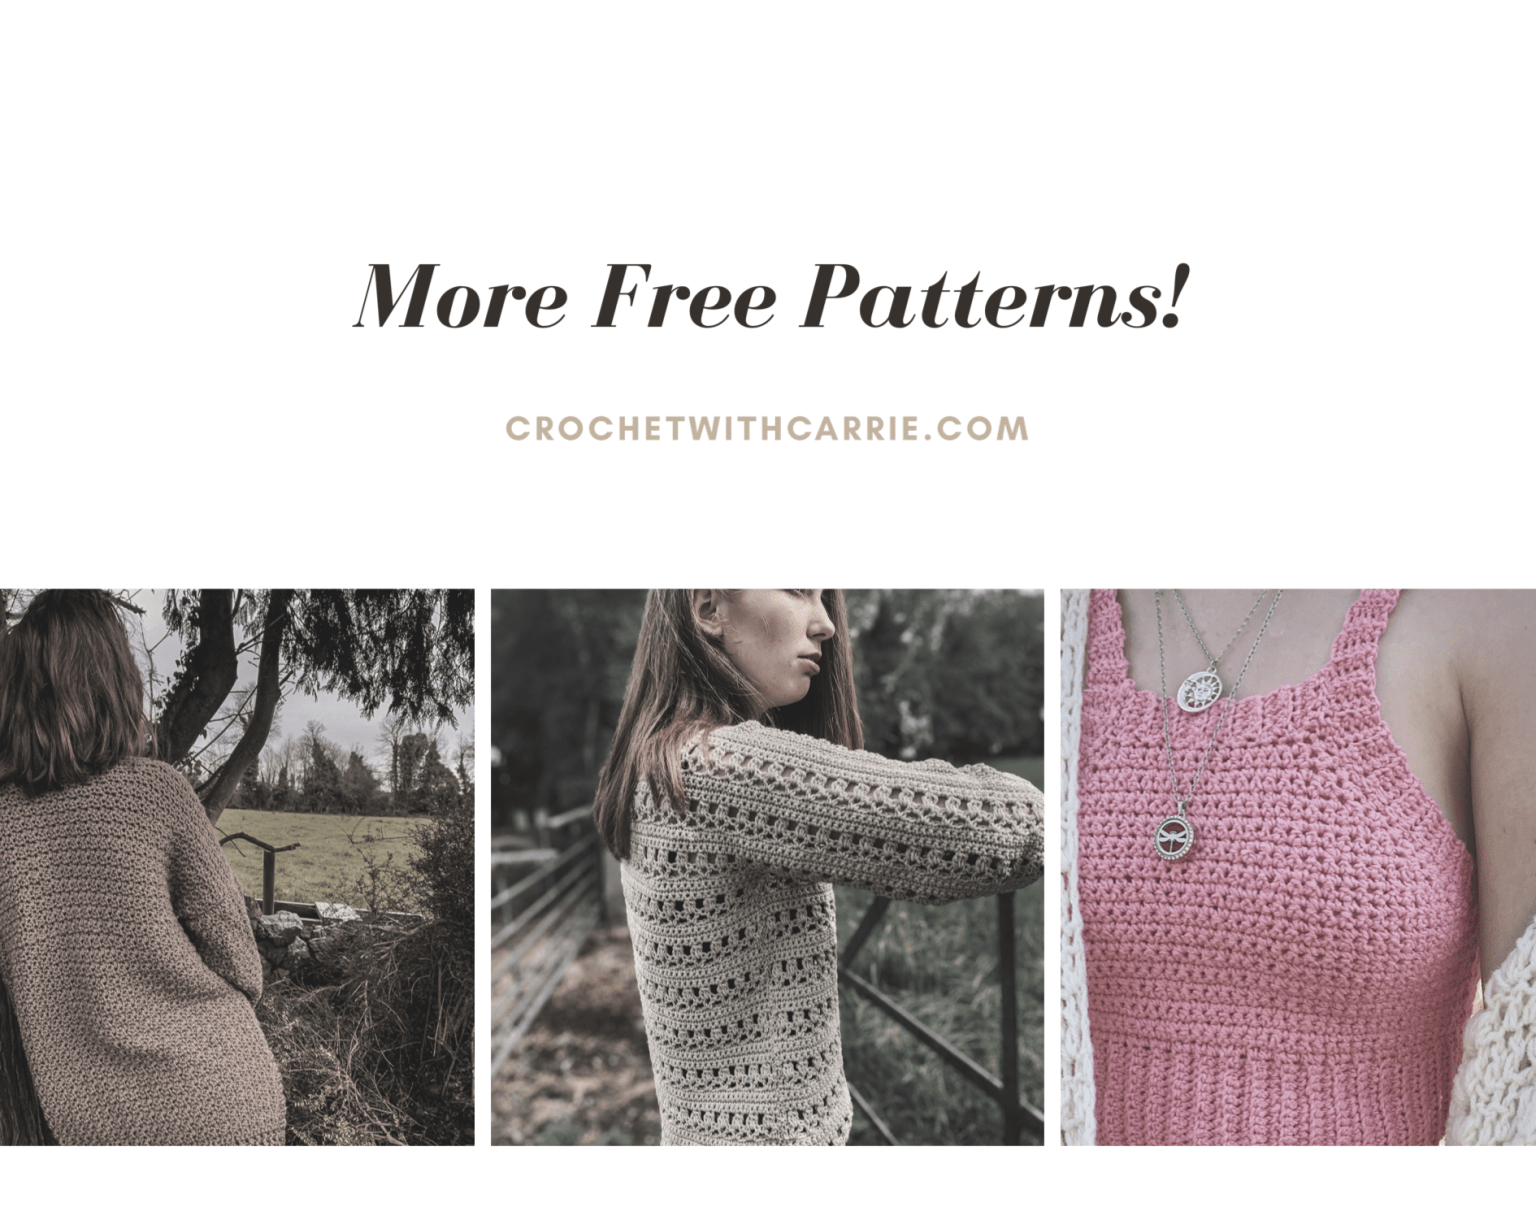 Crochet Shawl With Pockets - Crochet with Carrie